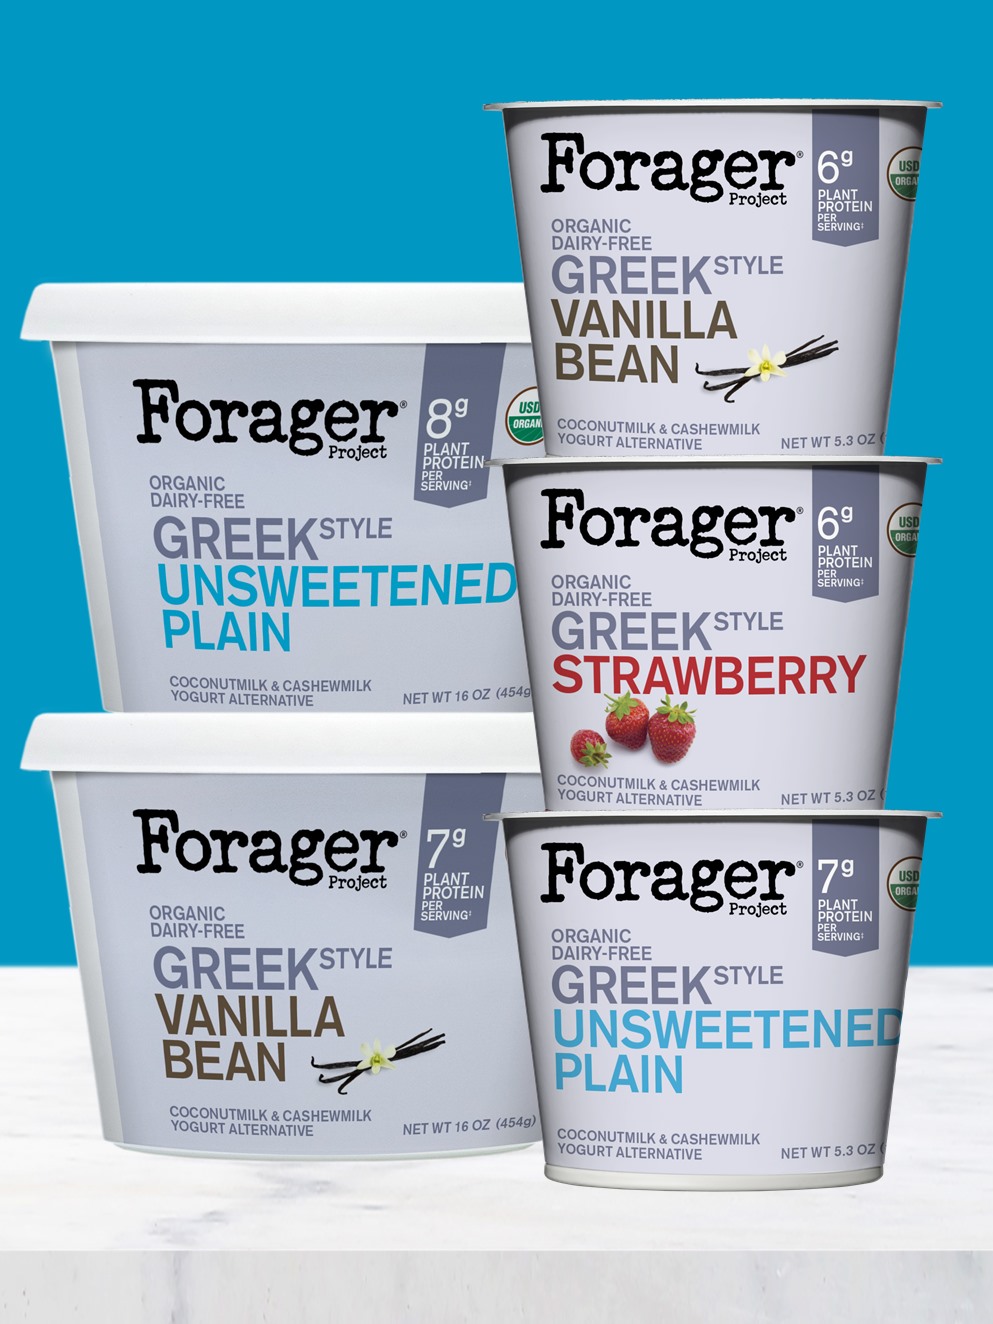 Forager Dairy-Free Greek Yogurt Reviews & Info - Made with Vegan Cashewmilk and Coconutmilk and Live Active Cultures